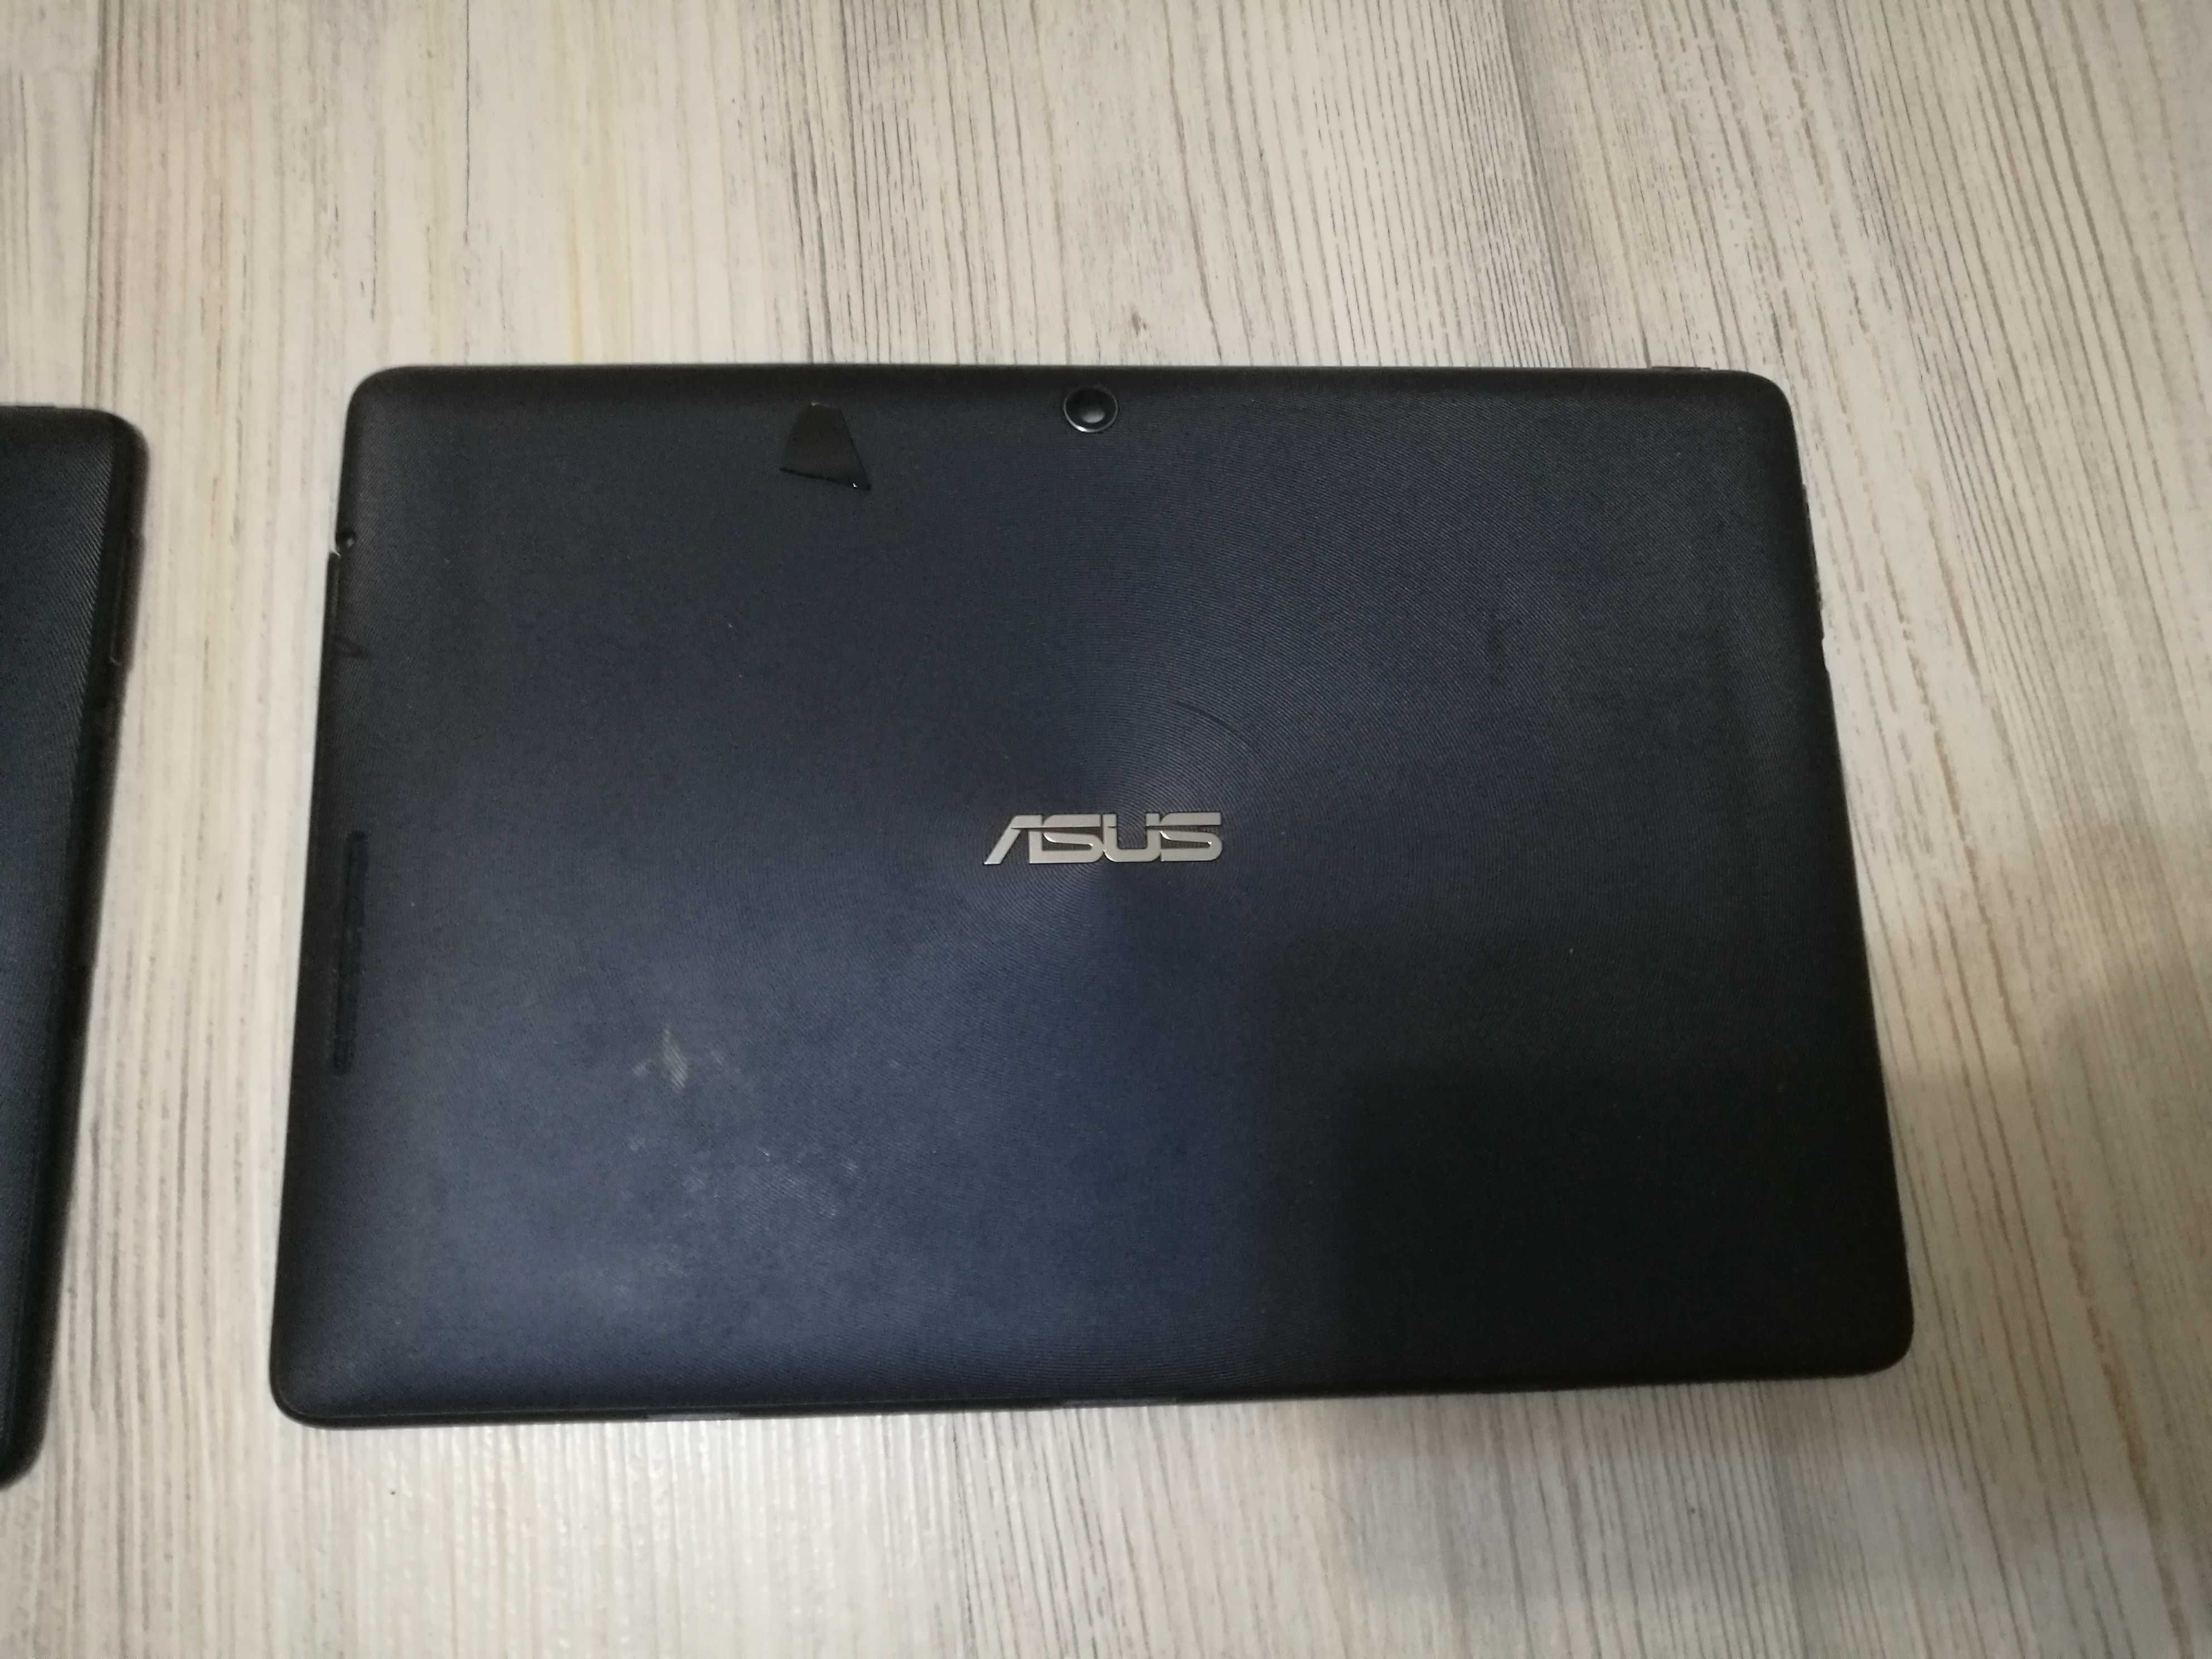 Asus TF300, ASUS TF300T запчастини